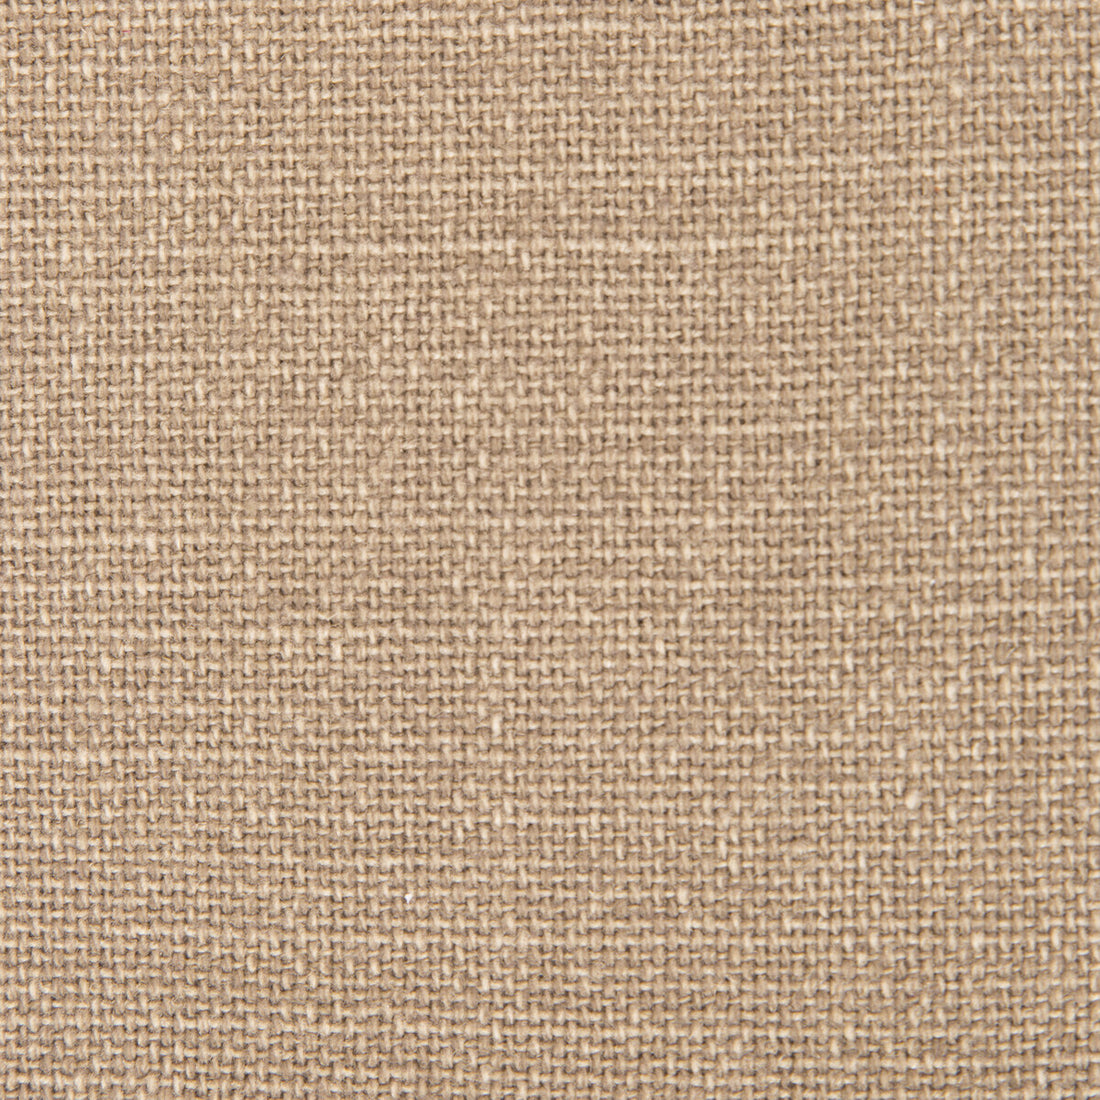 Nicaragua fabric in tostado color - pattern GDT5239.026.0 - by Gaston y Daniela in the Basics collection